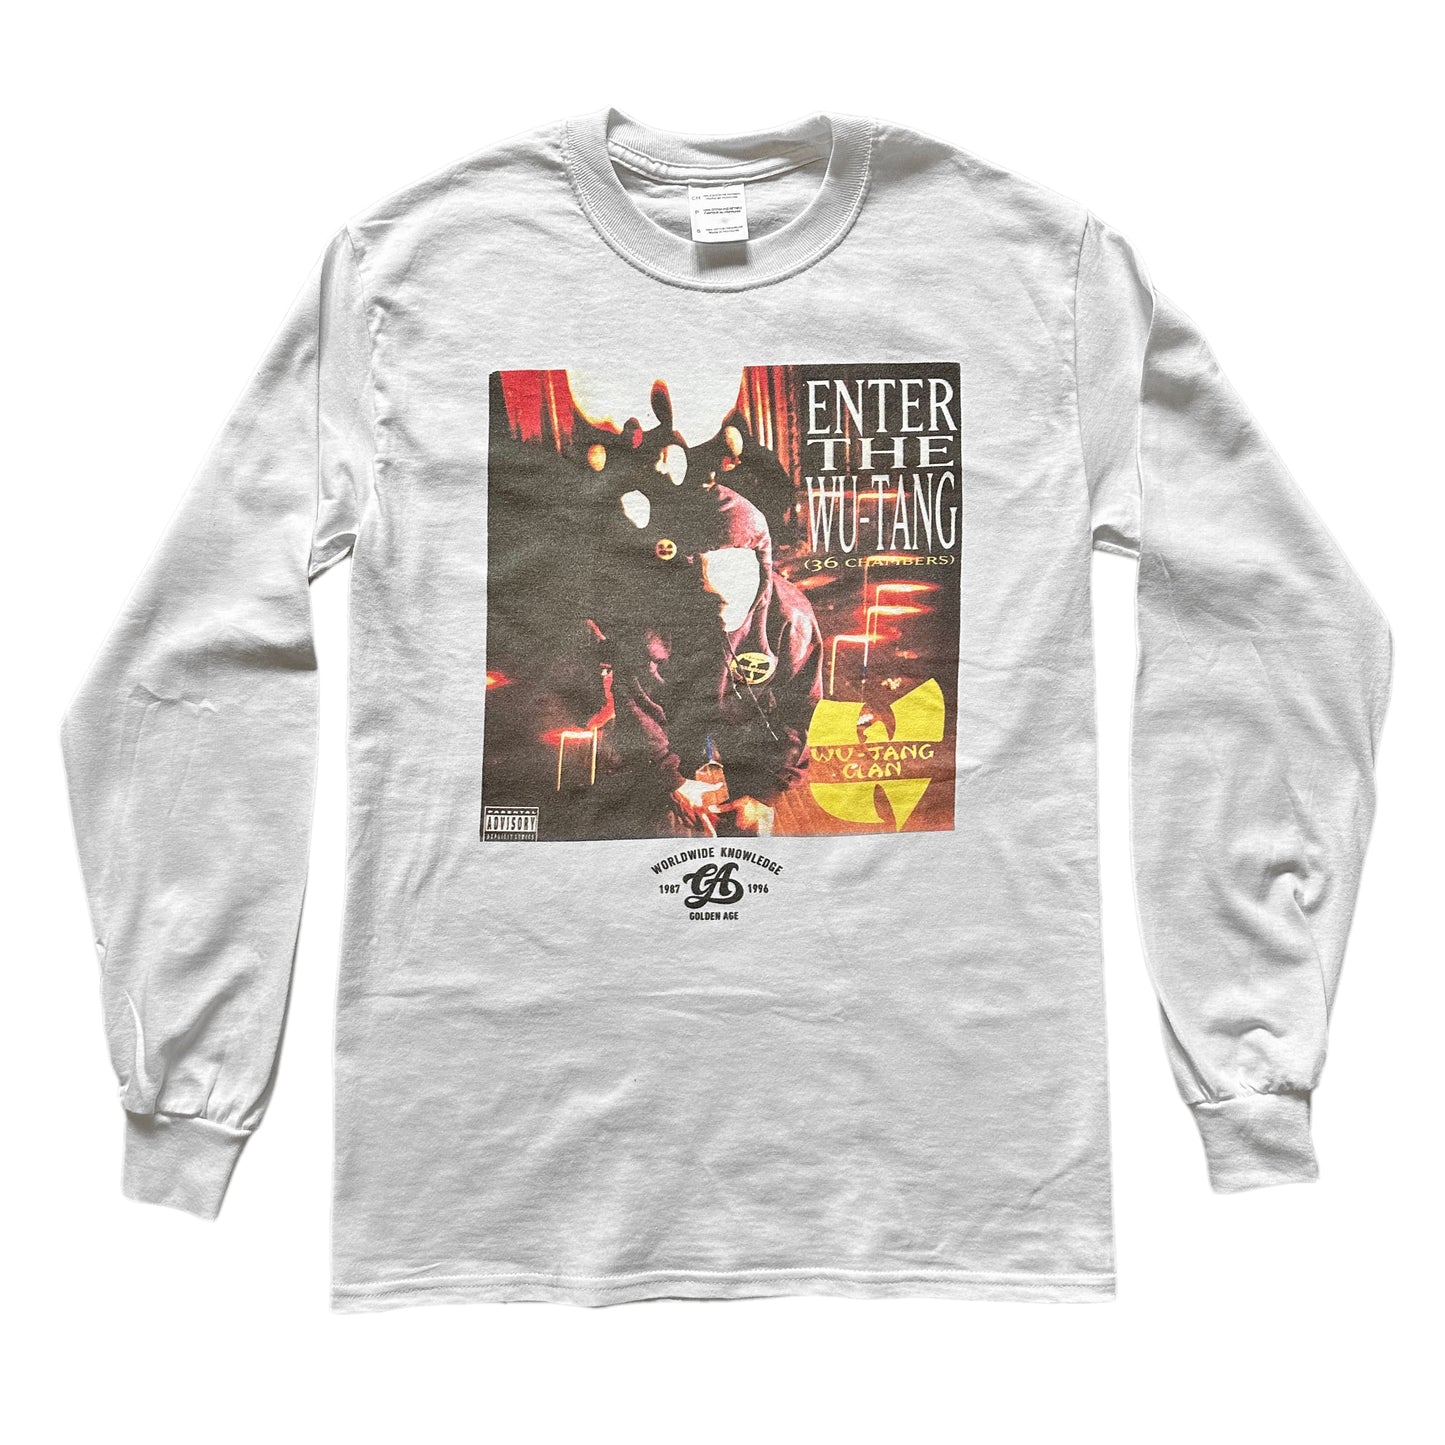 Golden Age 36 Chambers Long Sleeves Tee White